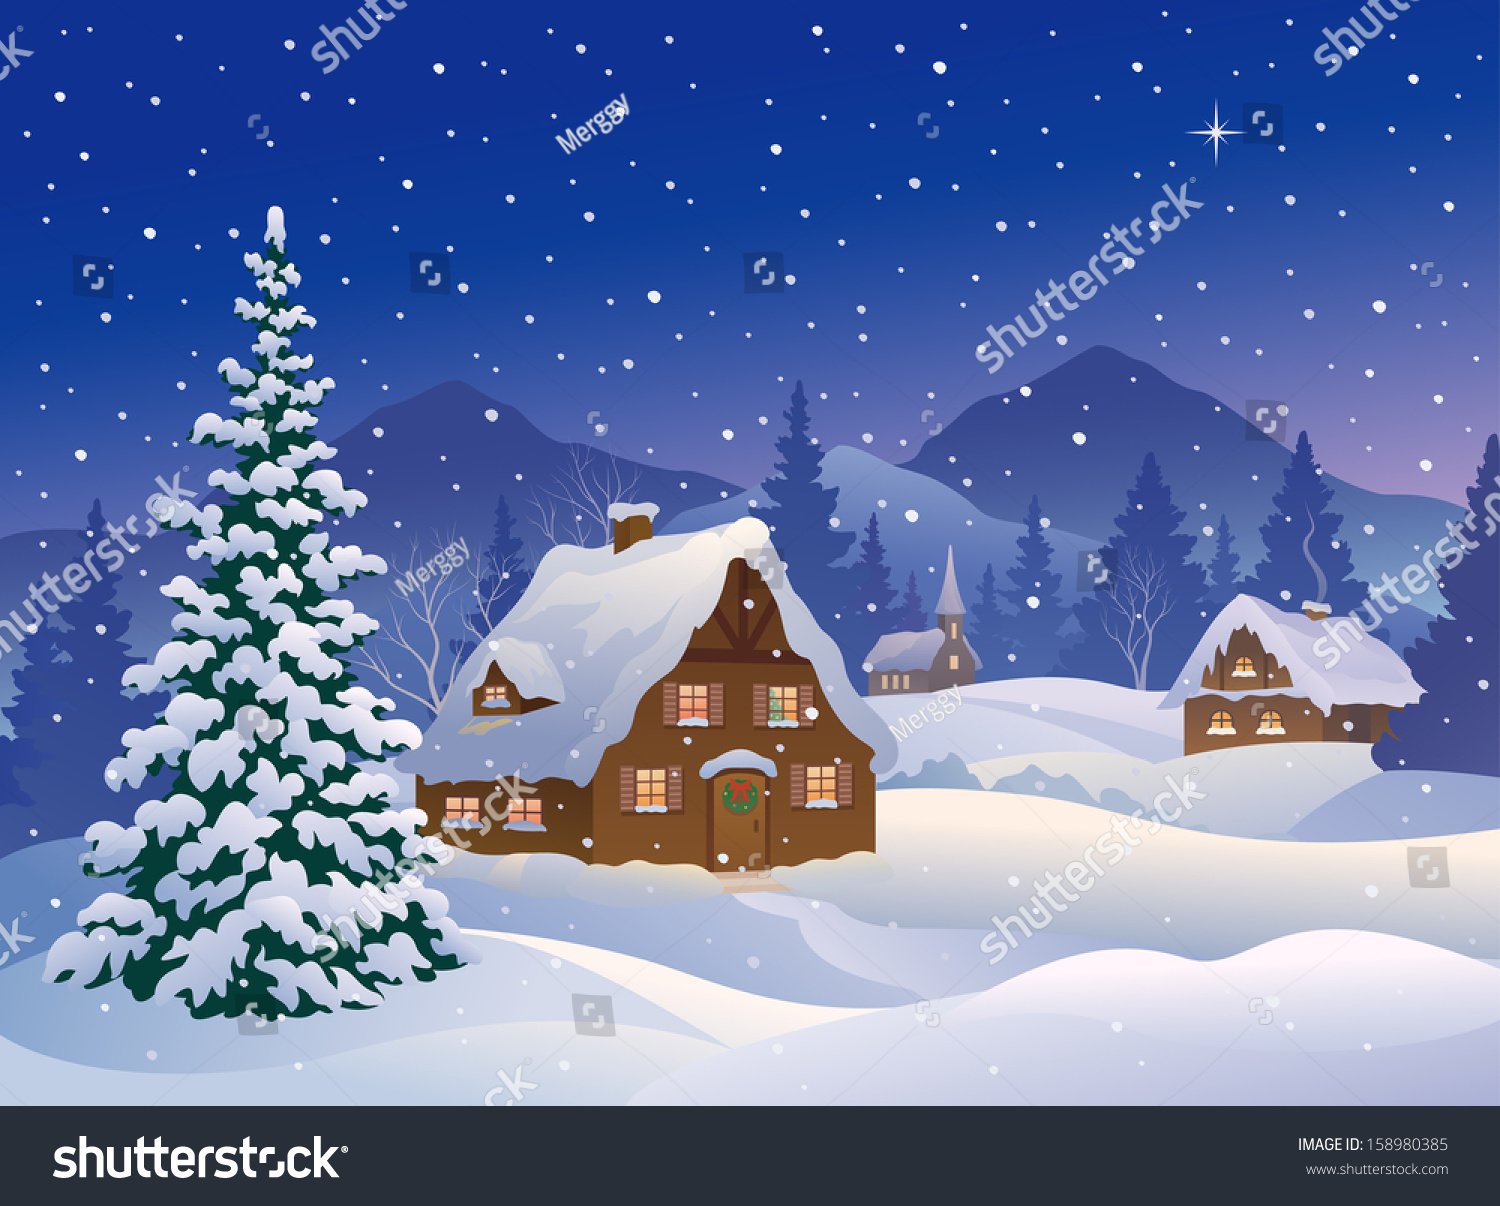 snowy woods clipart - photo #7